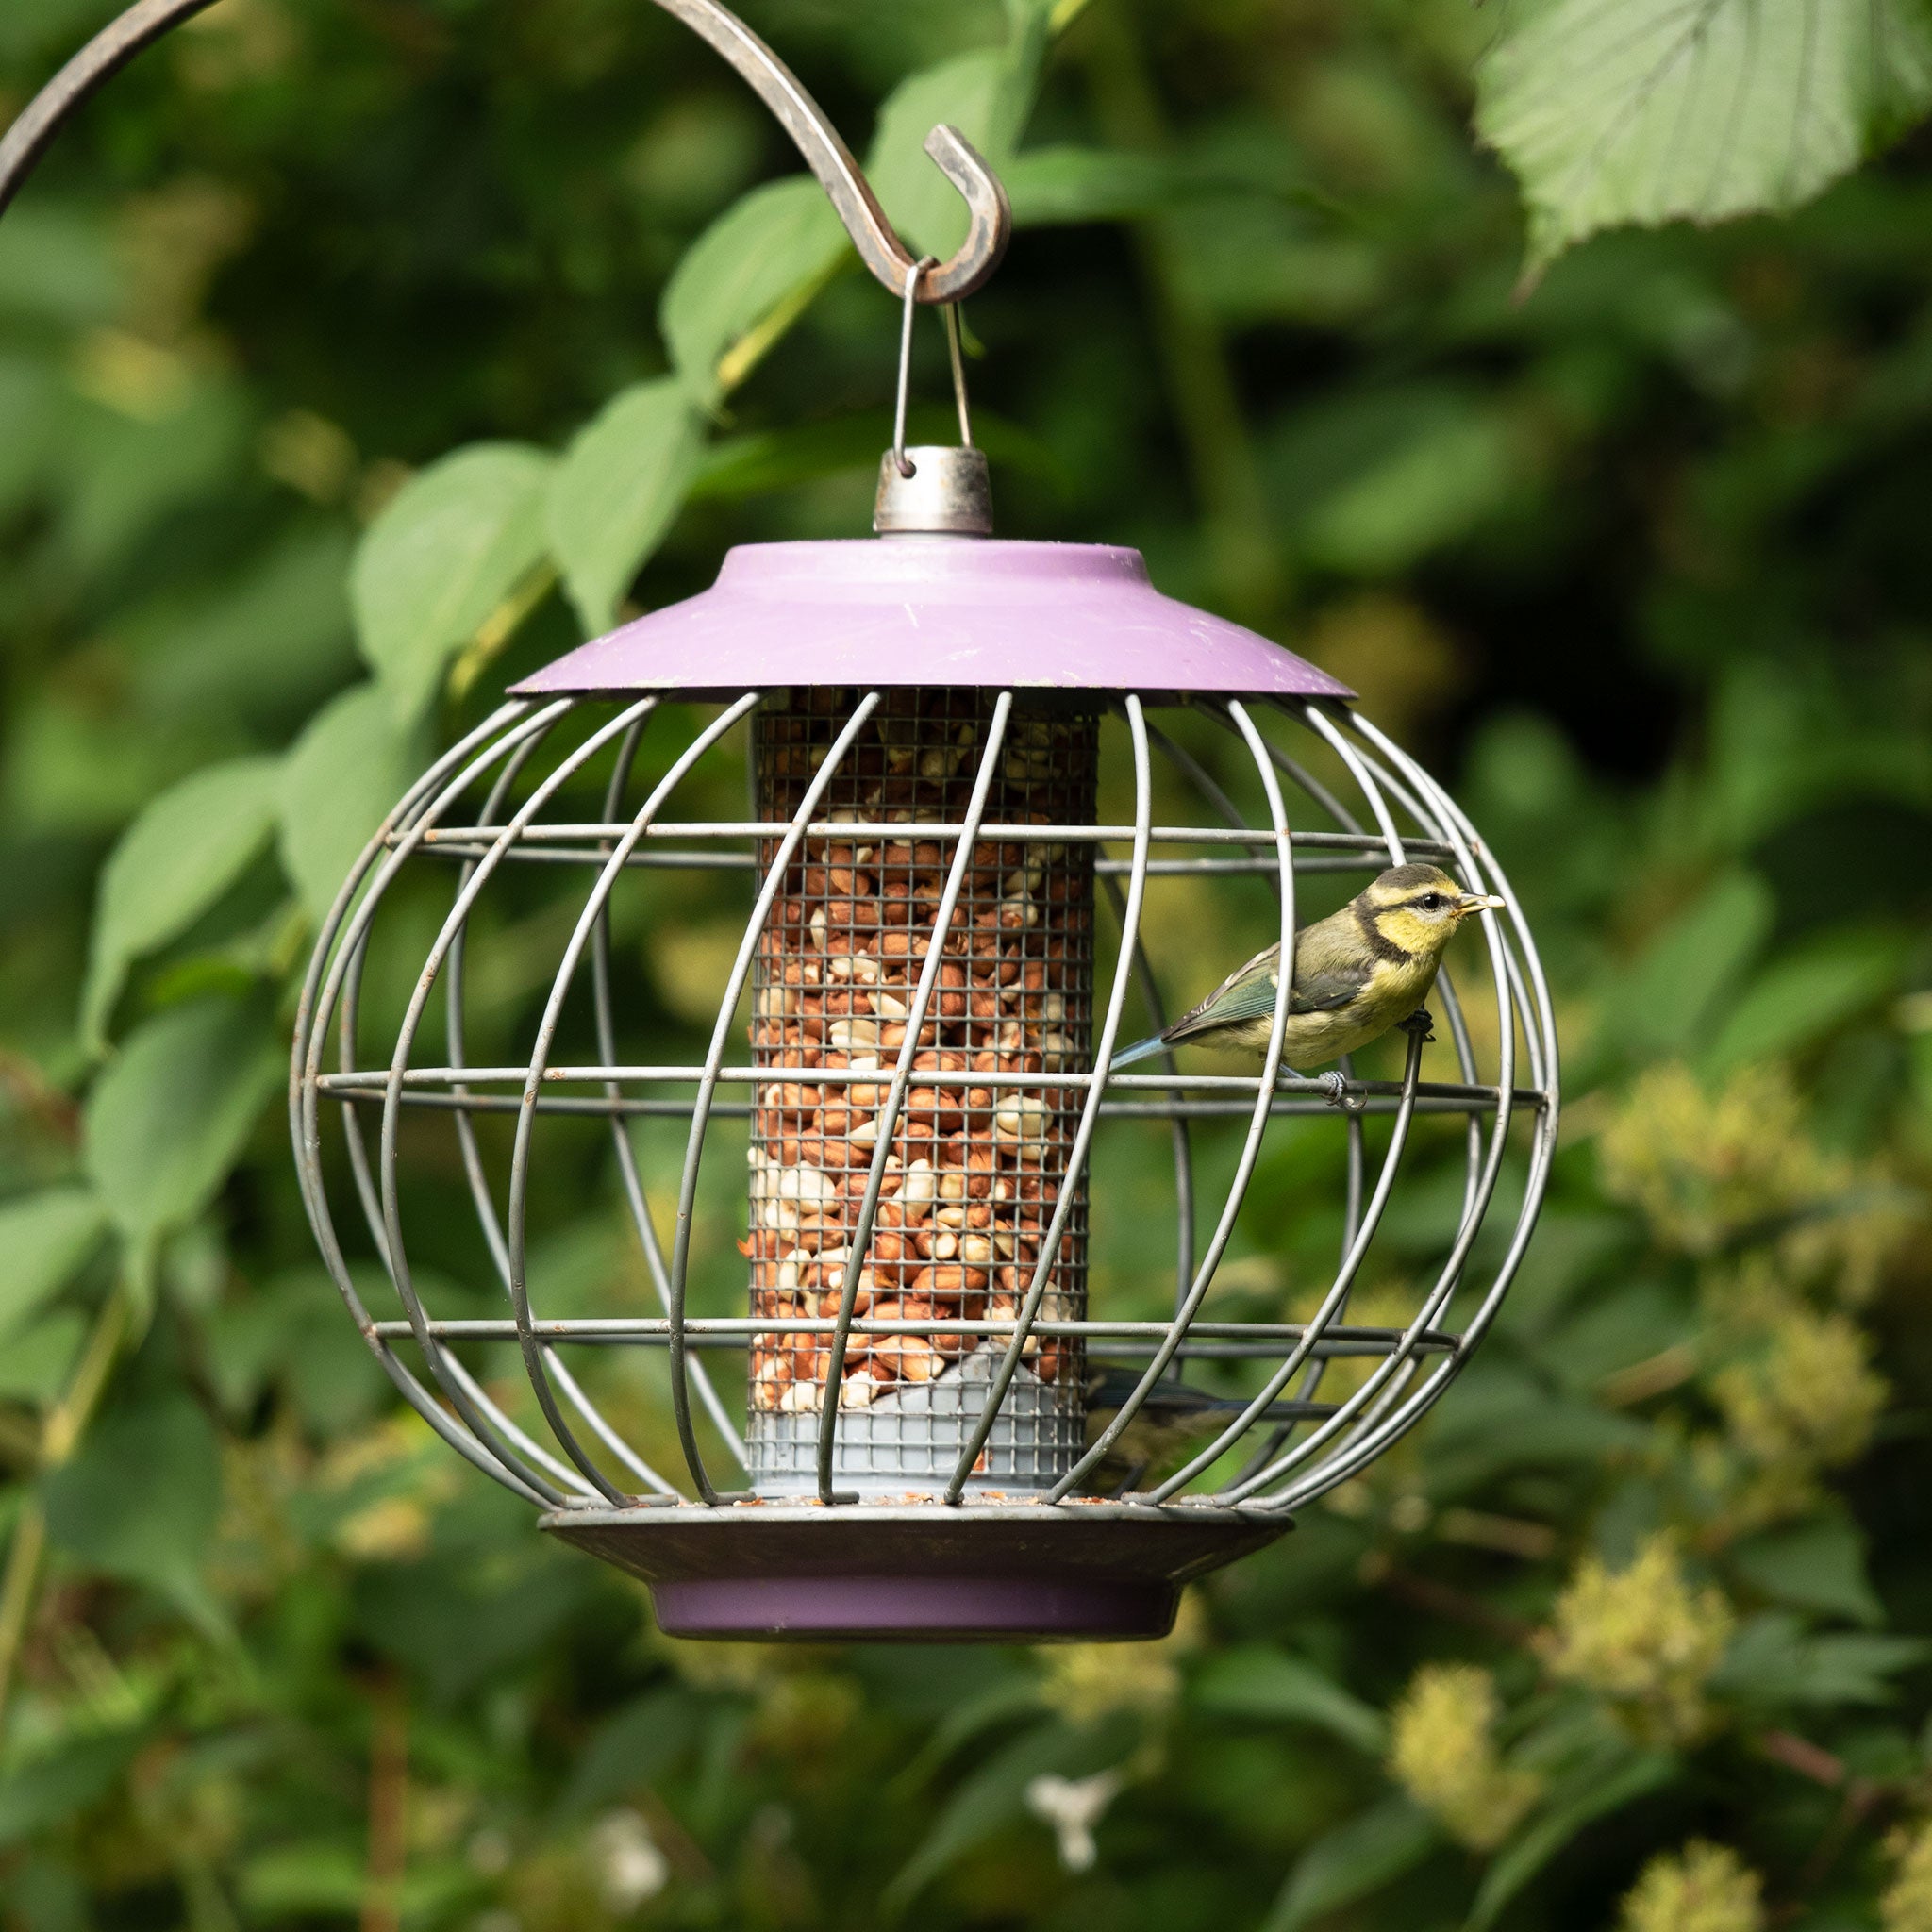 Close up of Tit in a caged peanut feeder